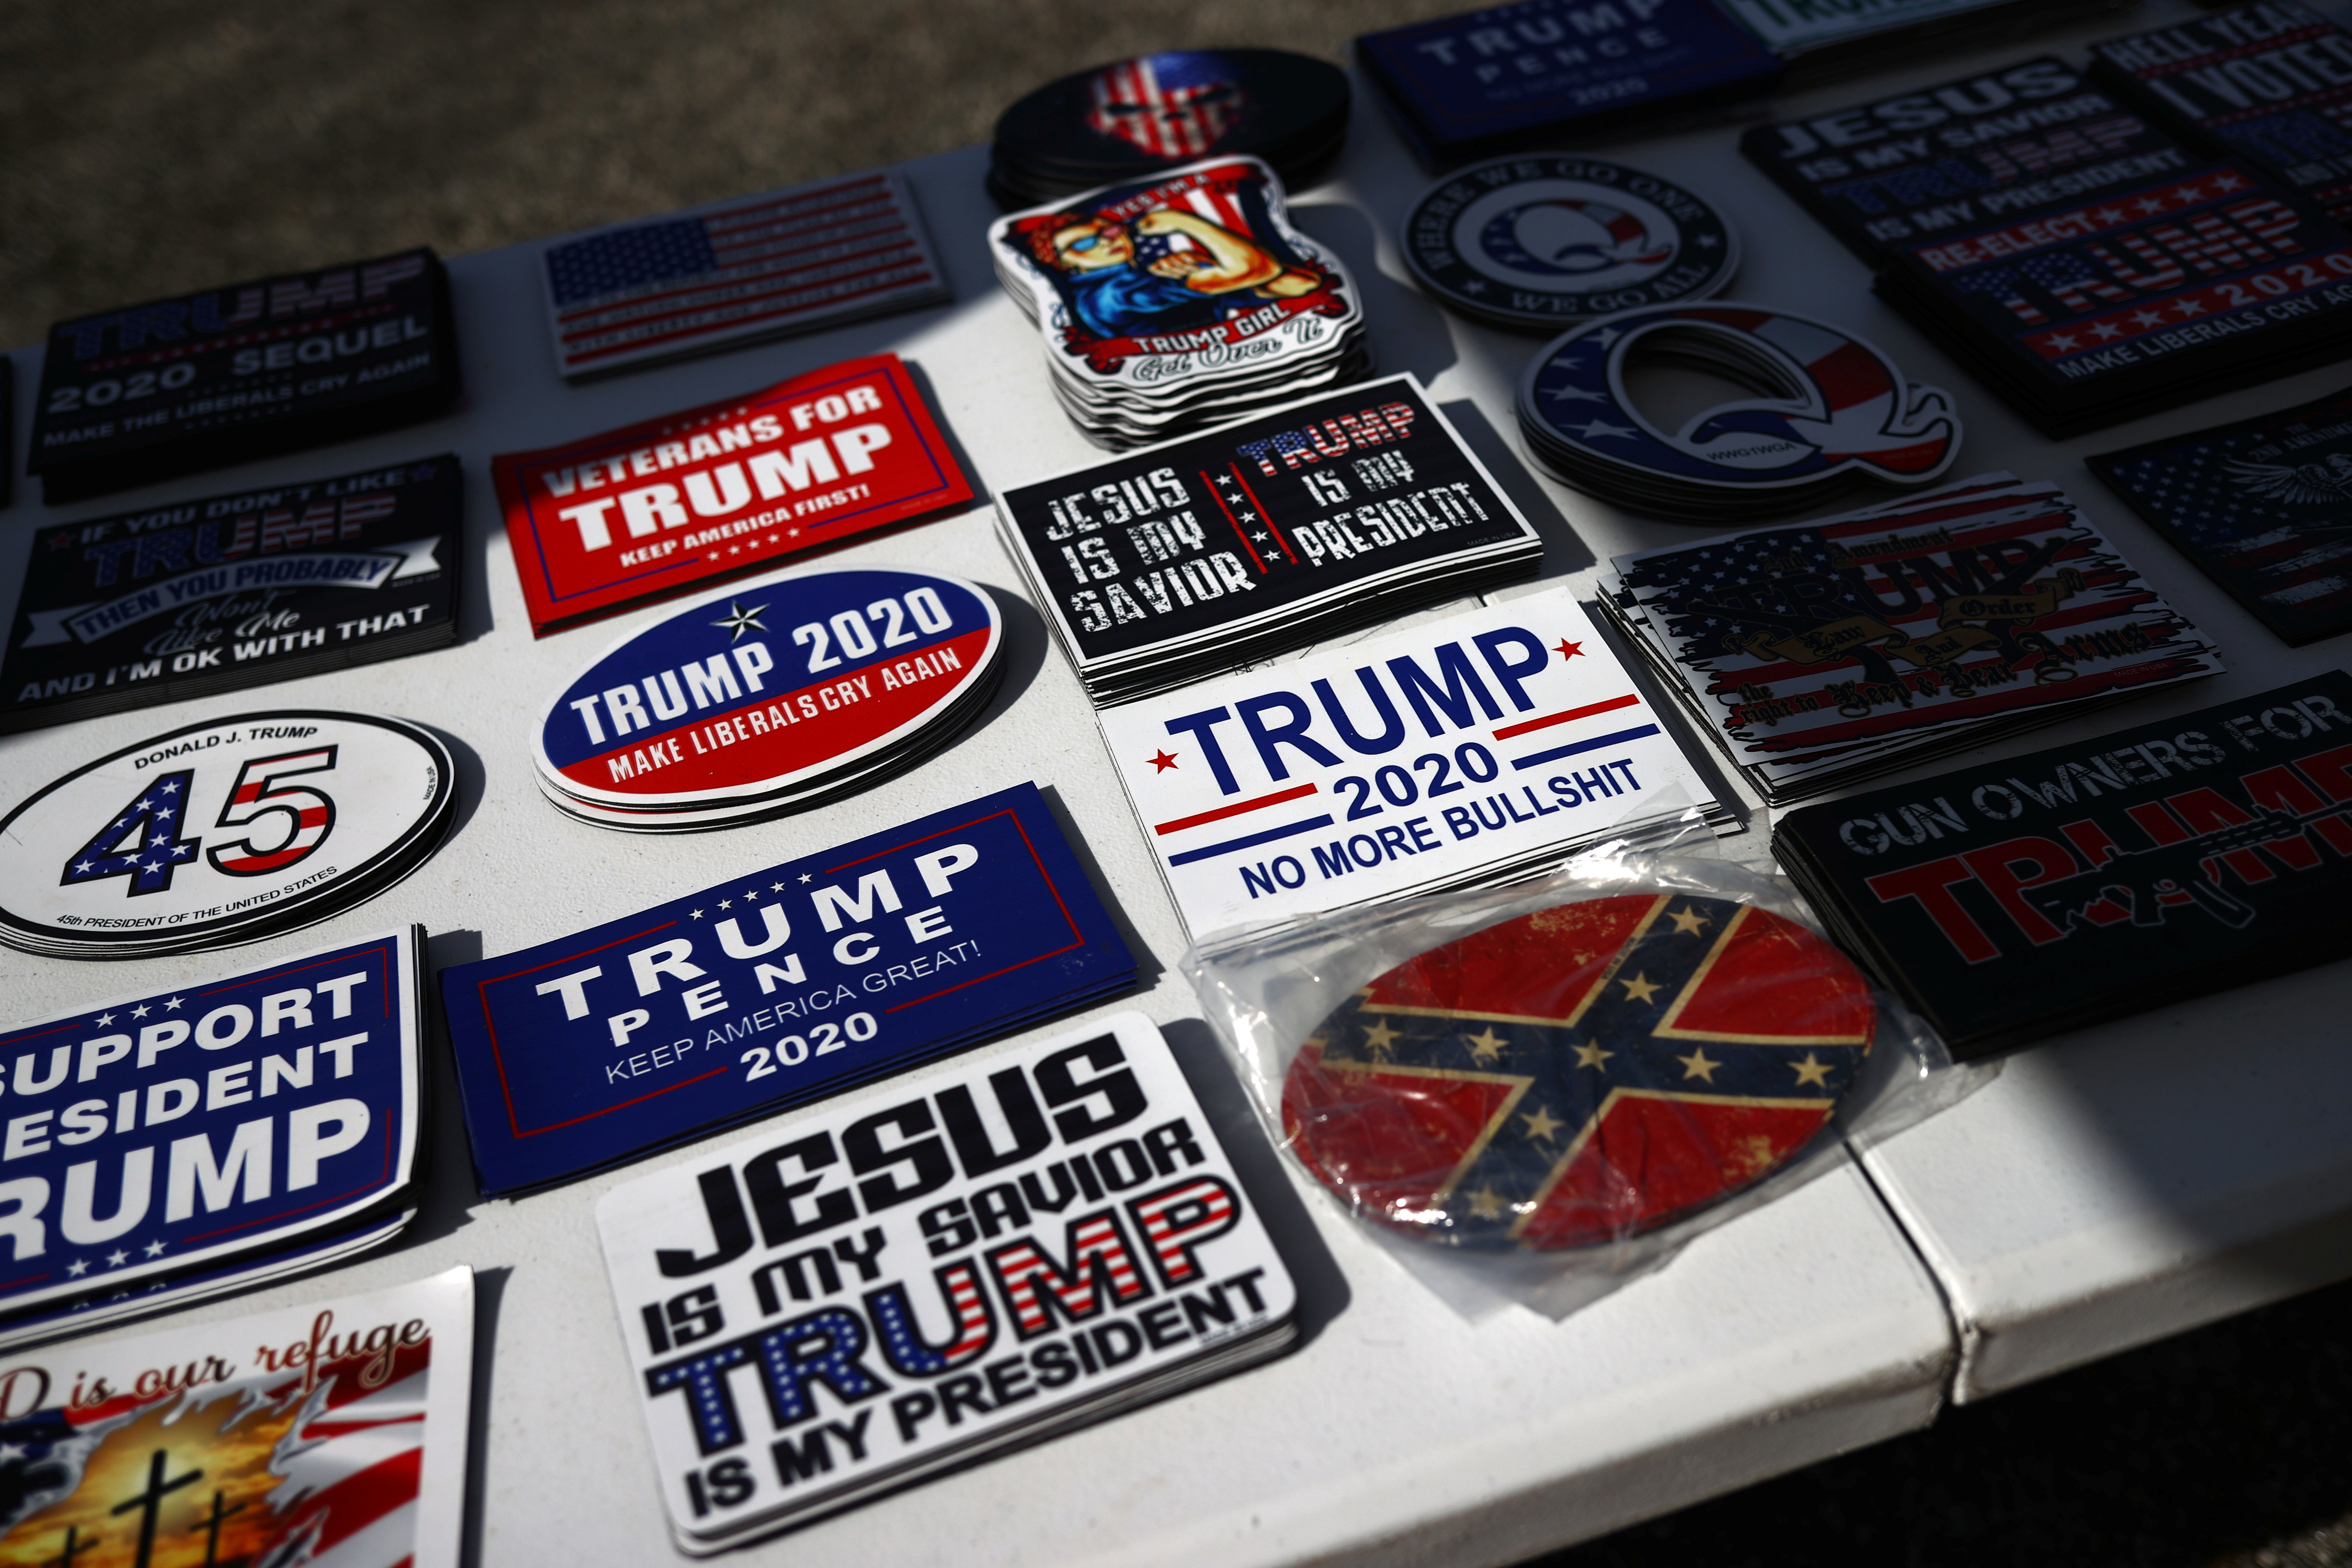 Memorabilias for sale during a campaign rally by U.S. President Donald Trump at Hickory Regional Airport in Hickory, North Carolina U.S., November 1, 2020. REUTERS/Hannah McKay